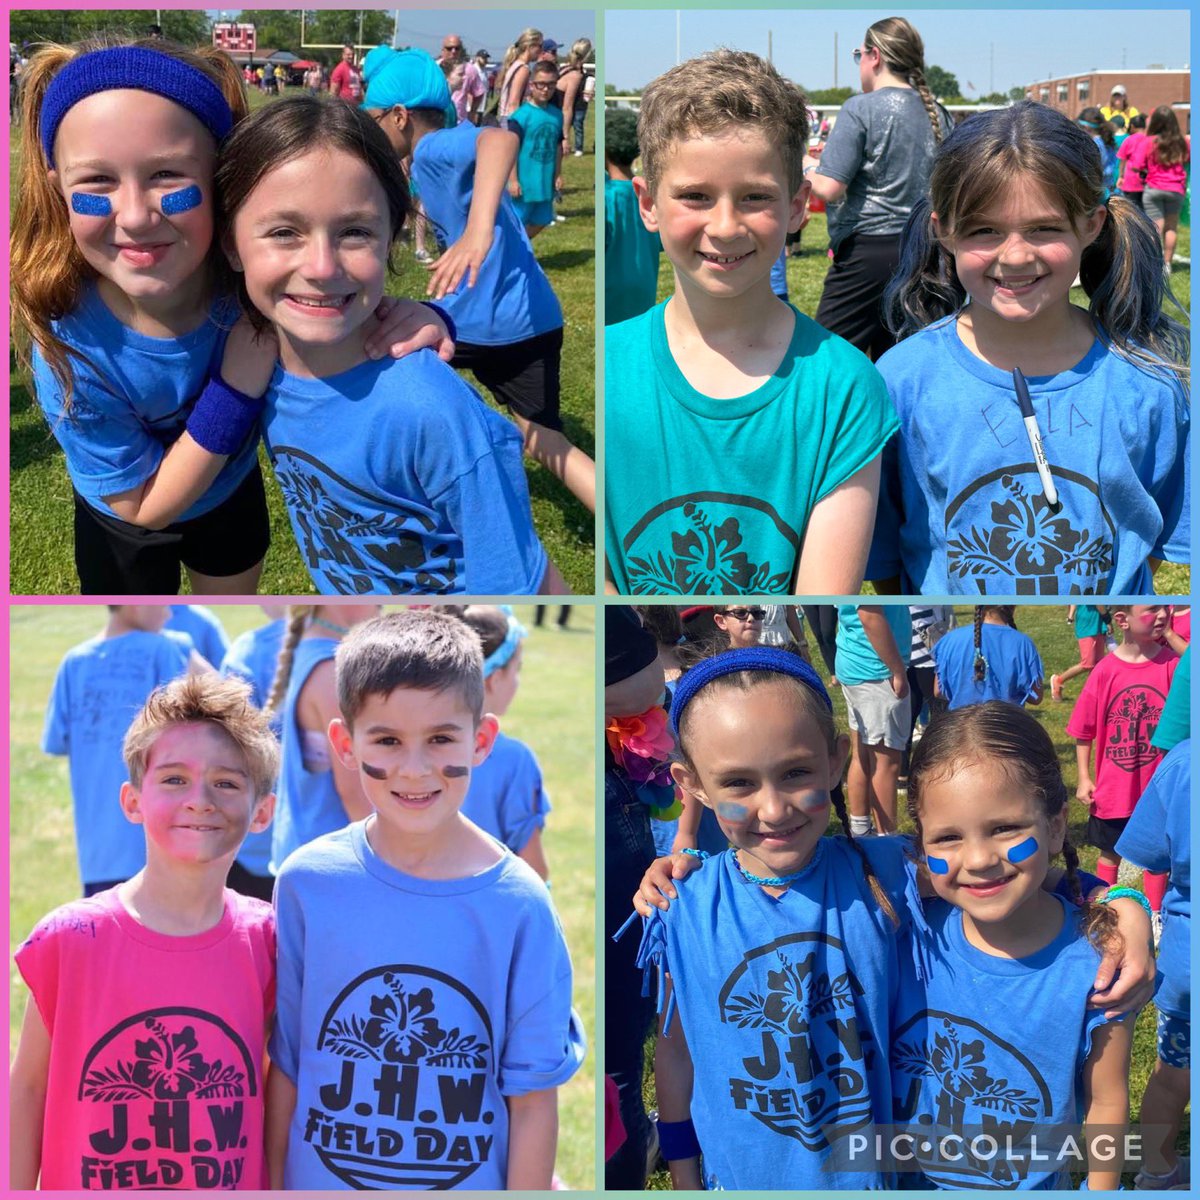 Students and teachers enjoyed being outside together yesterday for the annual Field Day festivities! Sunshine, smiles, and sportsmanship all around! ☀️😎🏃‍♀️🥇